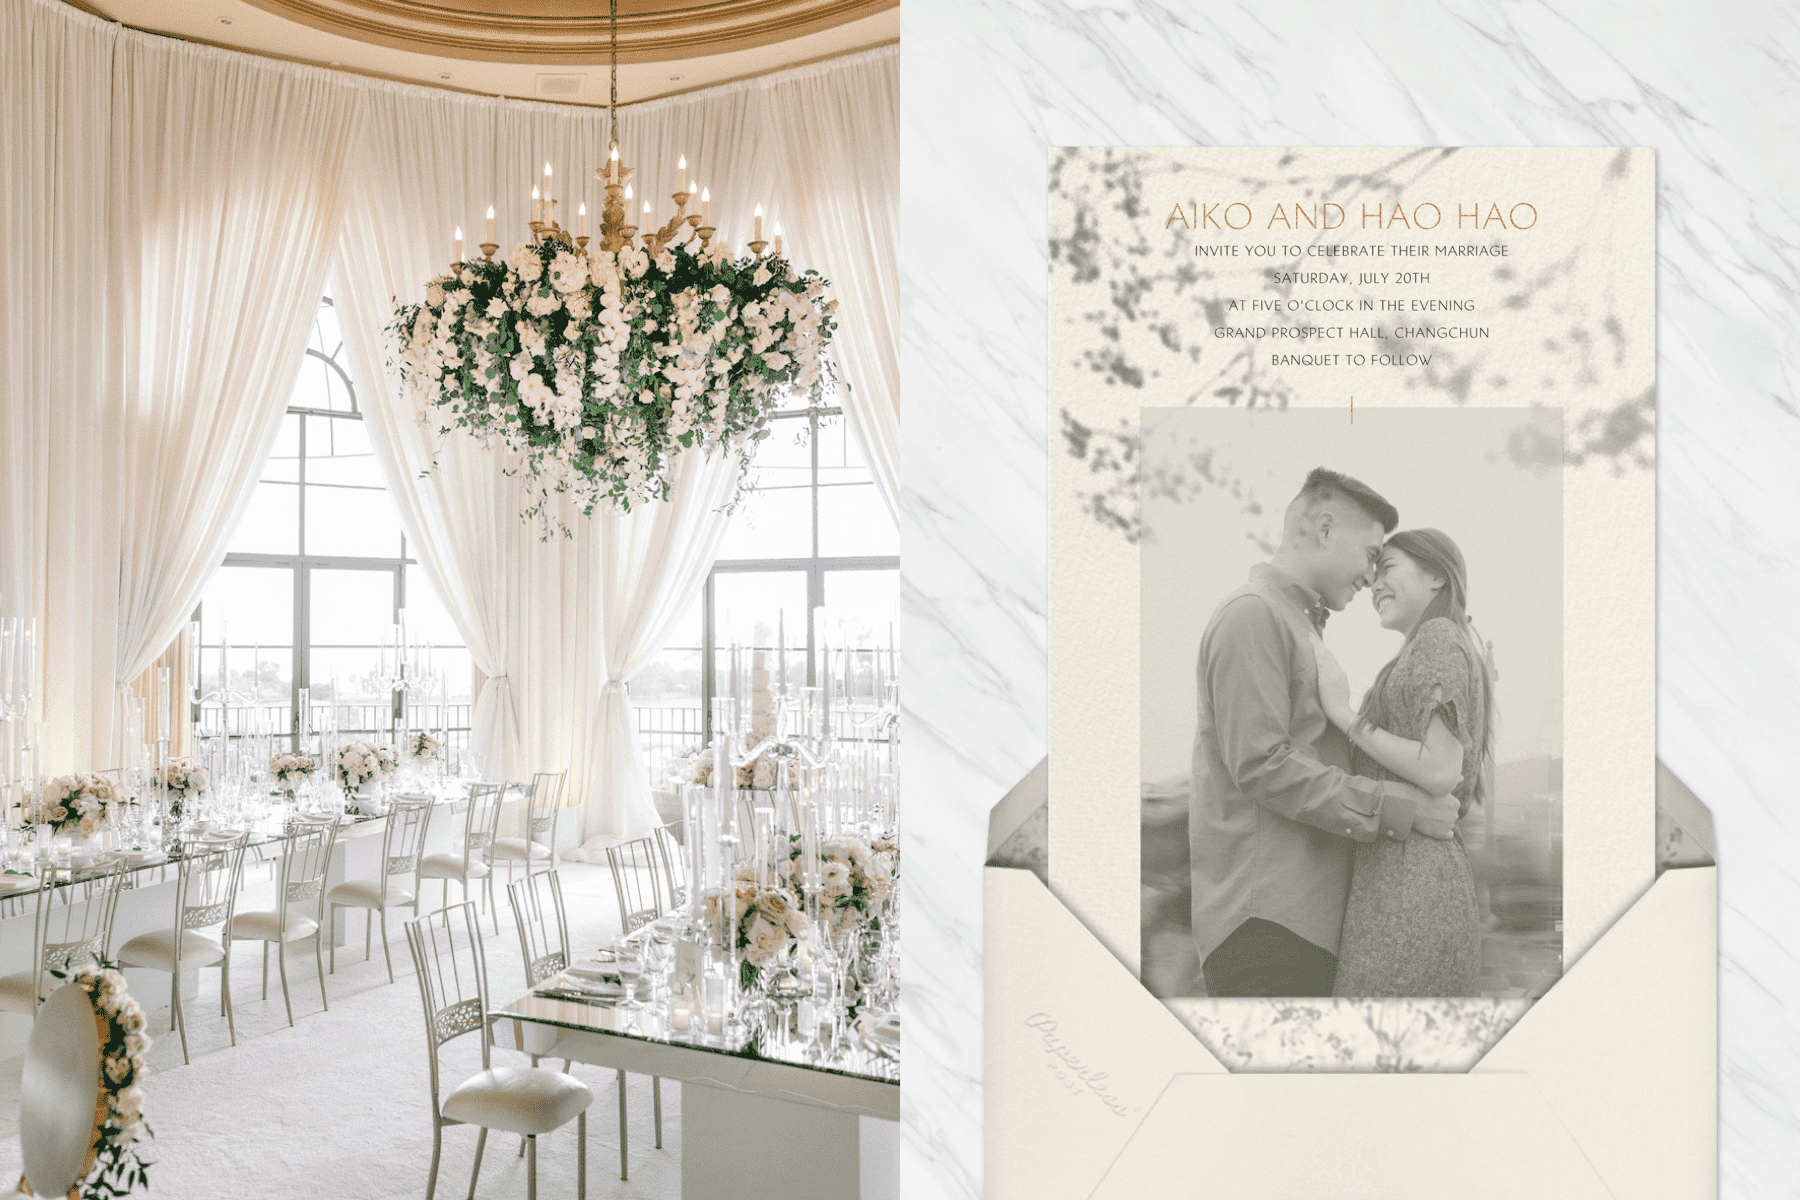 Tables set for an indoor wedding with large windows and a floral chandelier. Right: A wedding invitation with a faded black and white picture of a couple and a shadowy overlay of branches.